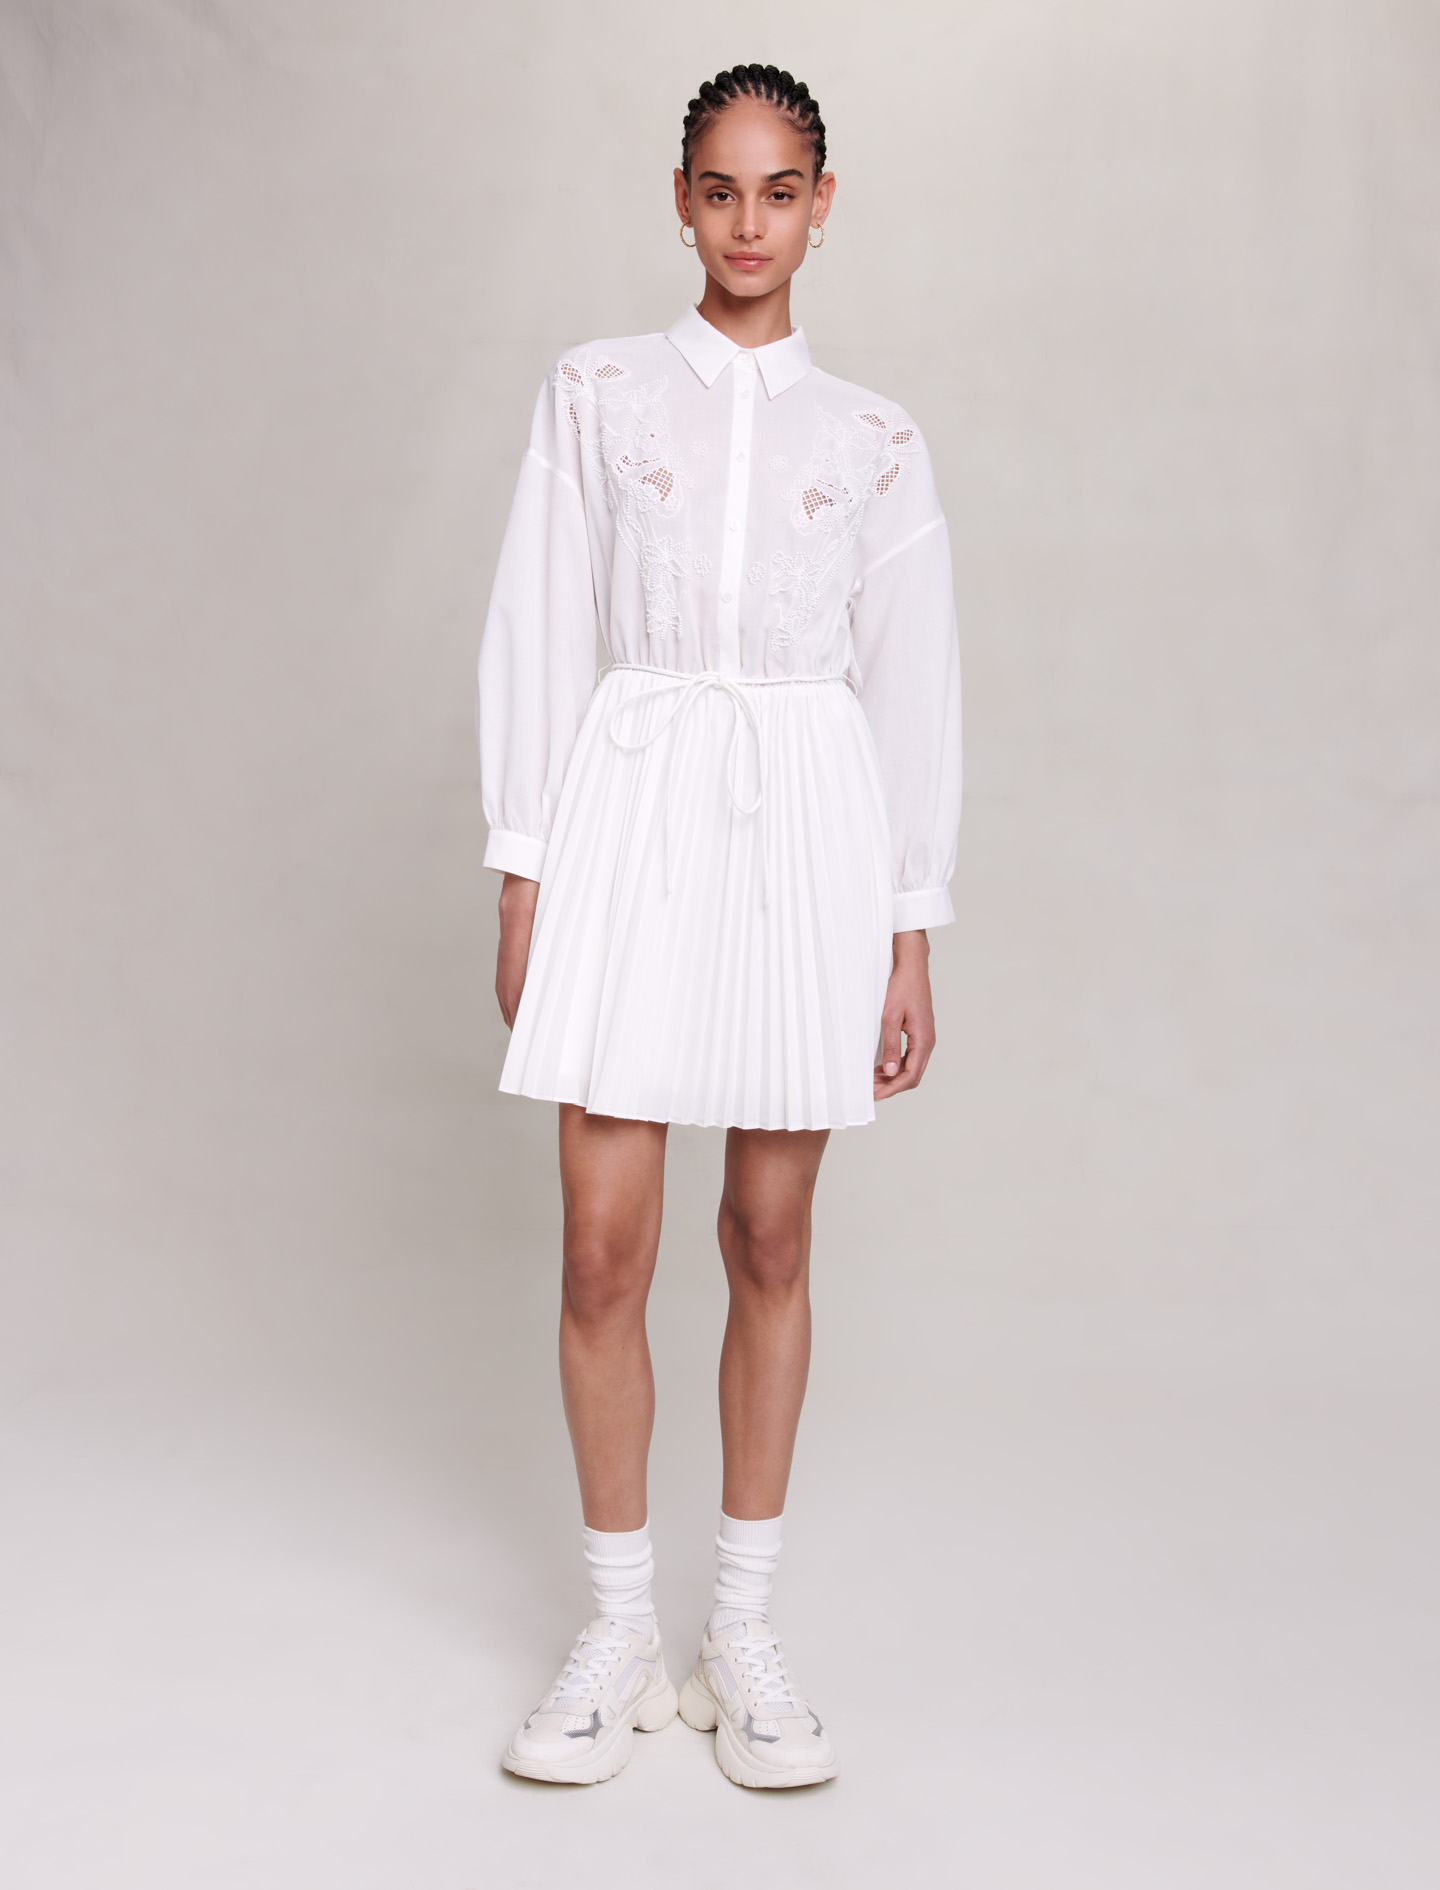 Maje Woman's polyester, Short shirt dress for Fall/Winter, in color White / White